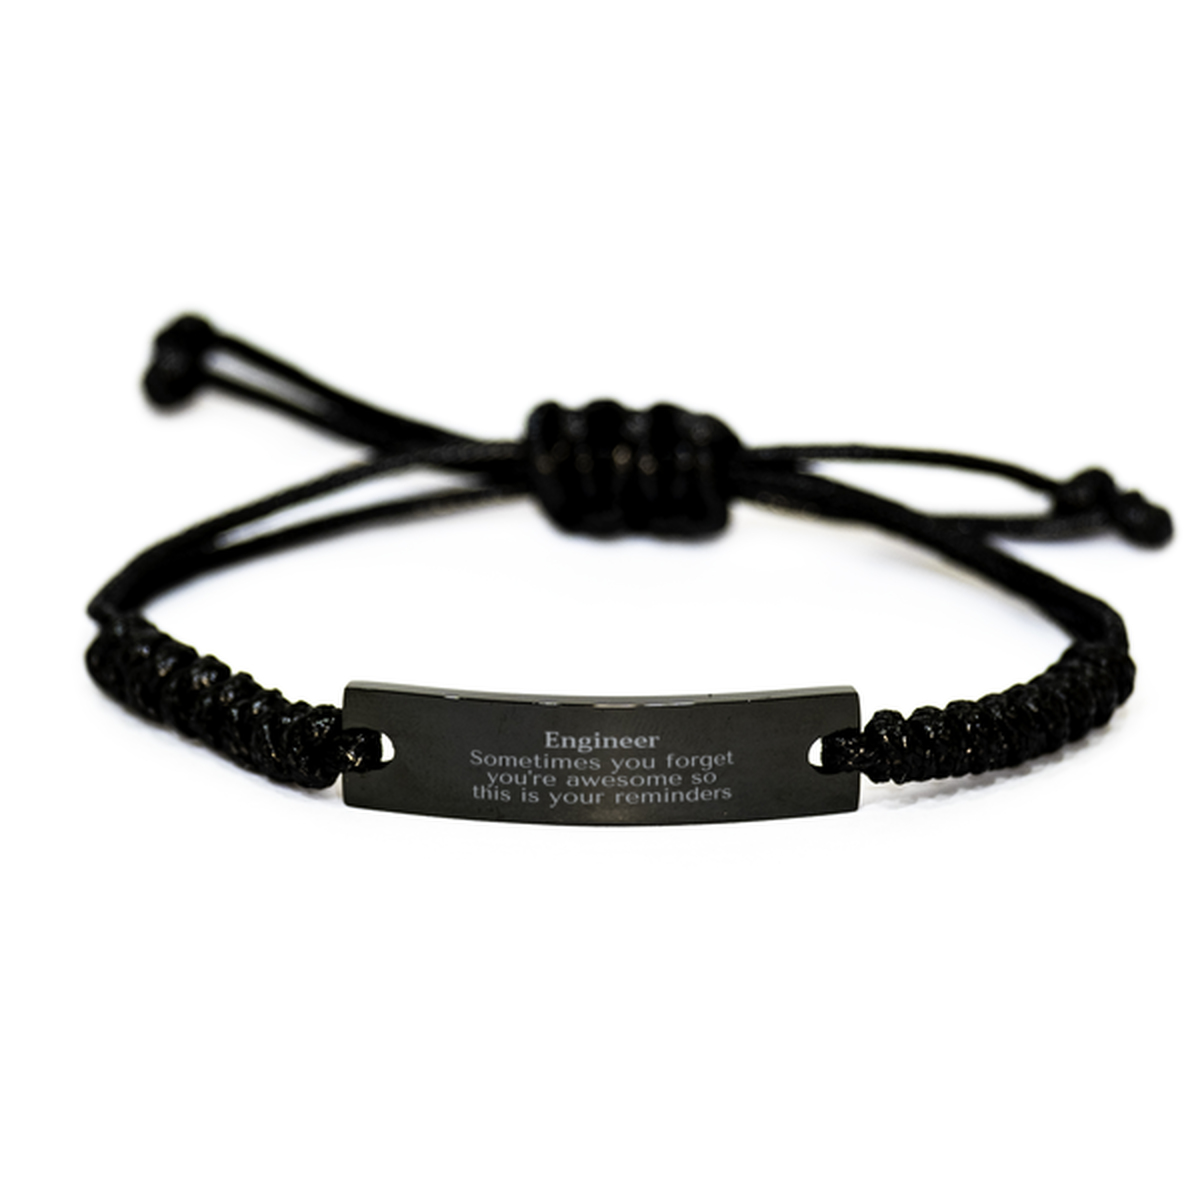 Sentimental Engineer Black Rope Bracelet, Engineer Sometimes you forget you're awesome so this is your reminders, Graduation Christmas Birthday Gifts for Engineer, Men, Women, Coworkers